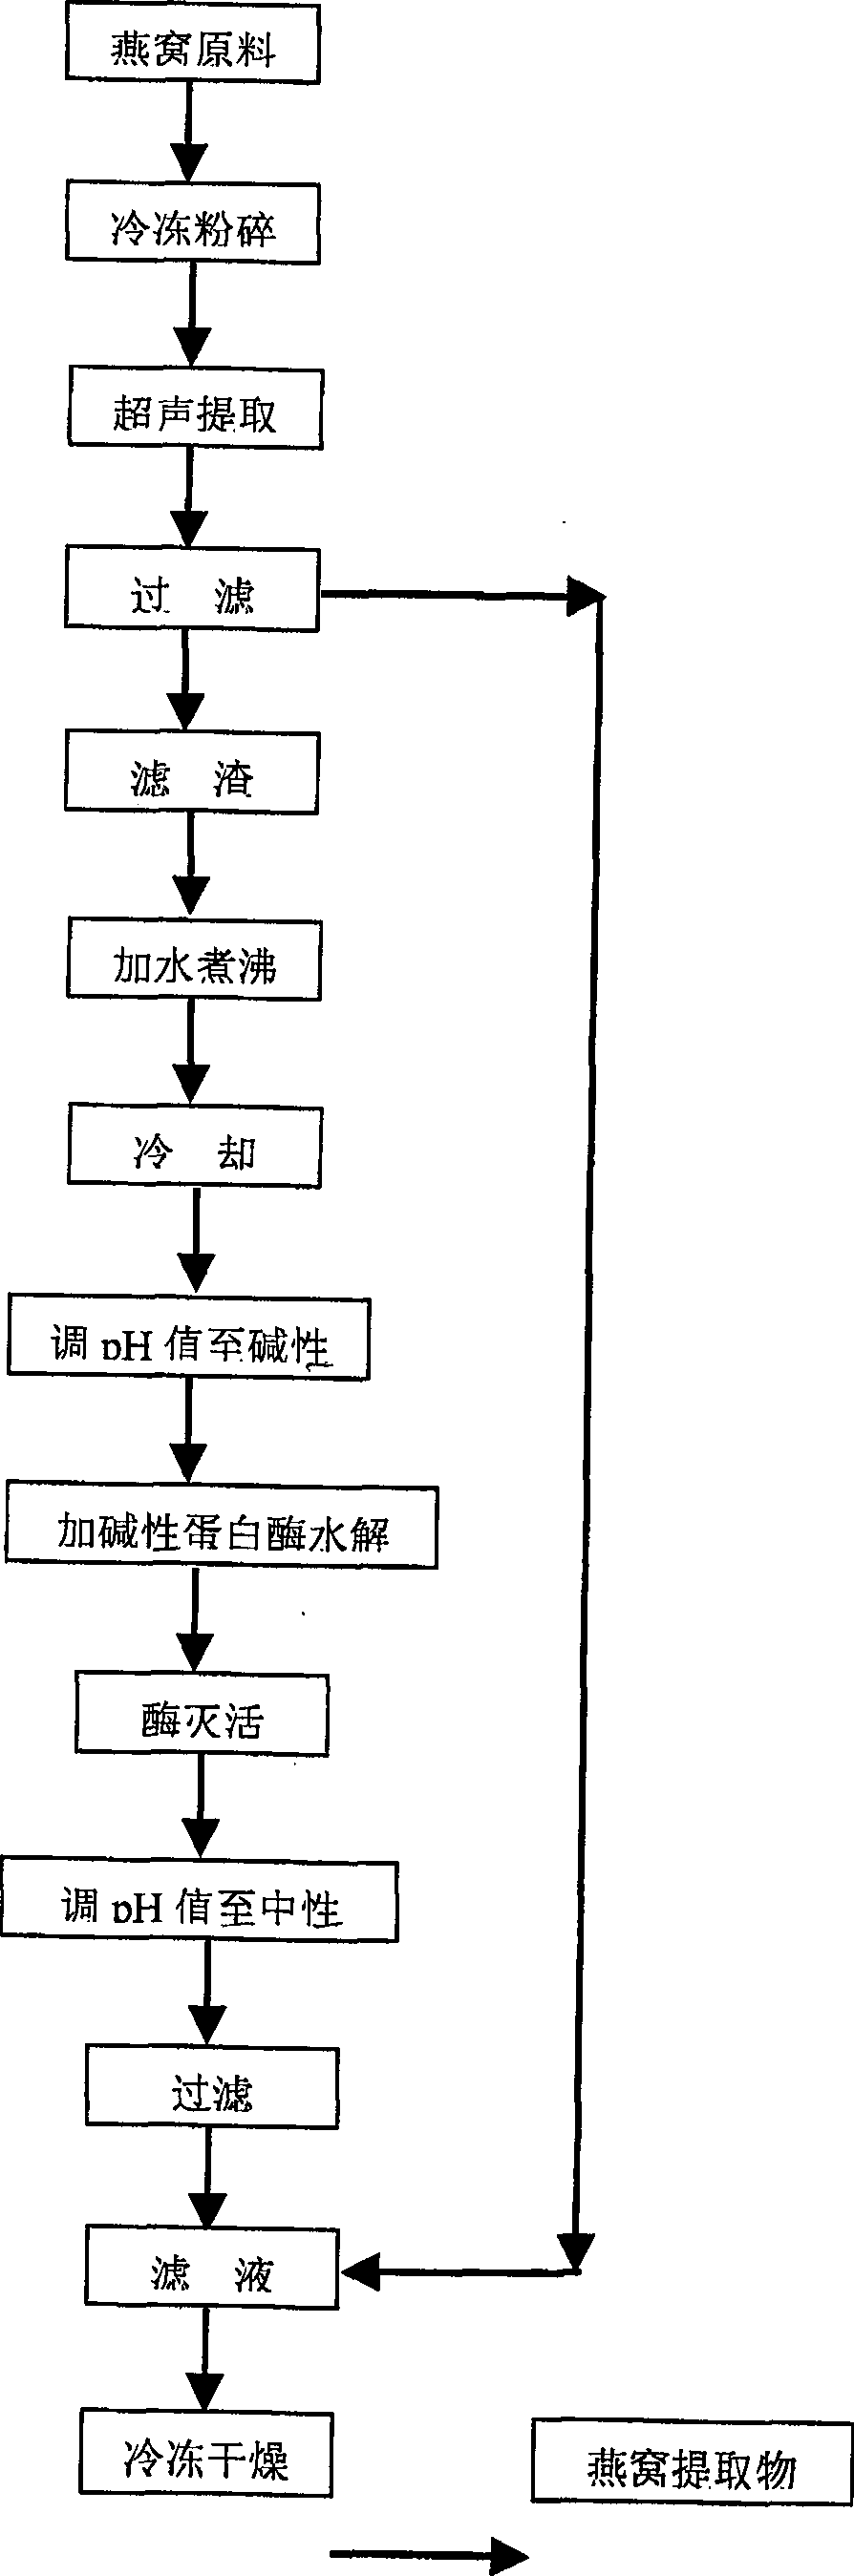 Process for preparing edible bird's nest extraction used for cosmetics